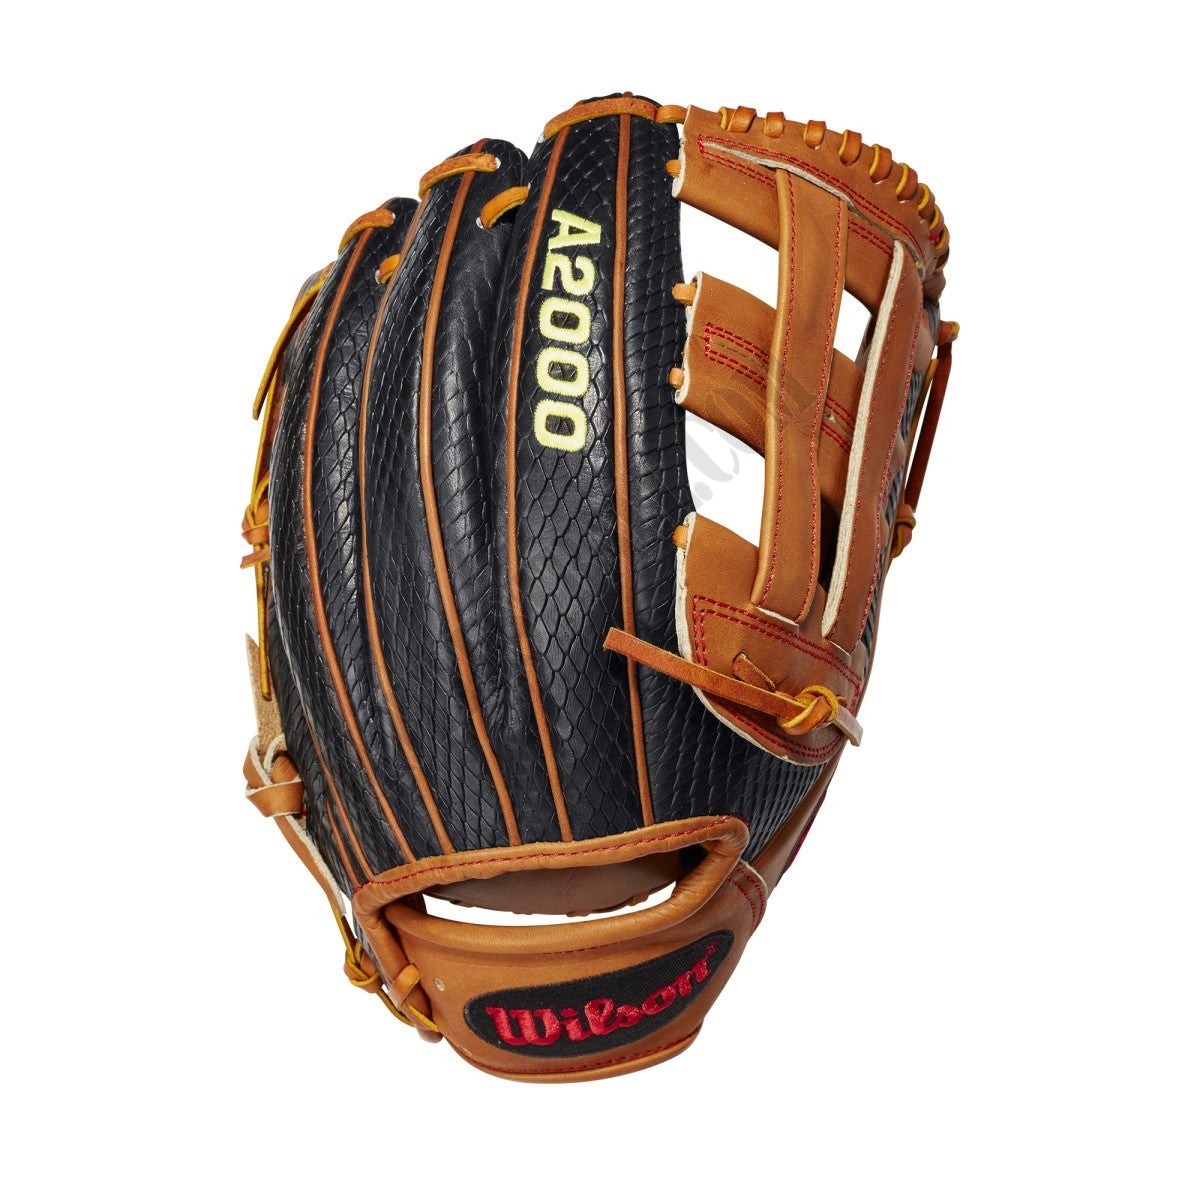 2021 A2000 DW5 12" Infield Baseball Glove -  Limited Edition ● Wilson Promotions - -1